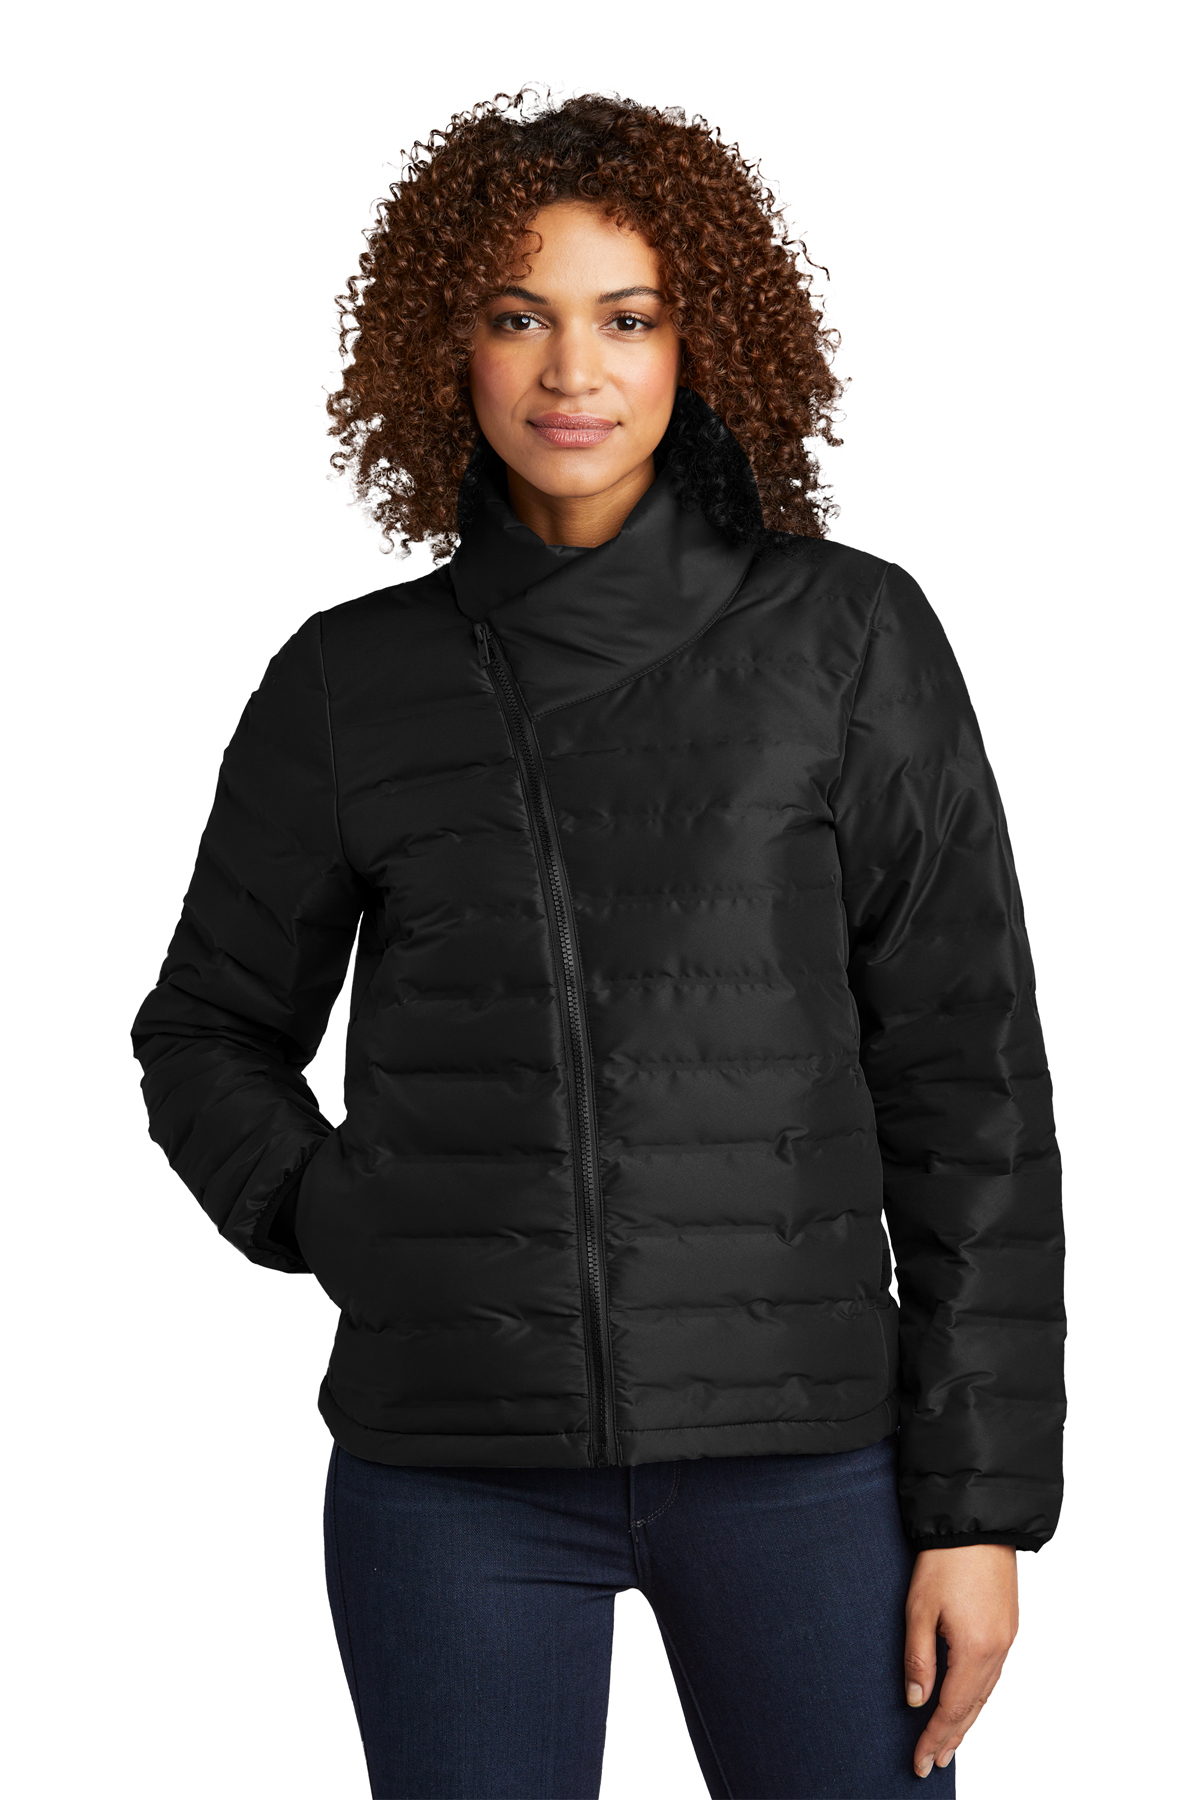 OGIO Ladies Street Puffy Full-Zip Jacket | Product | Company Casuals